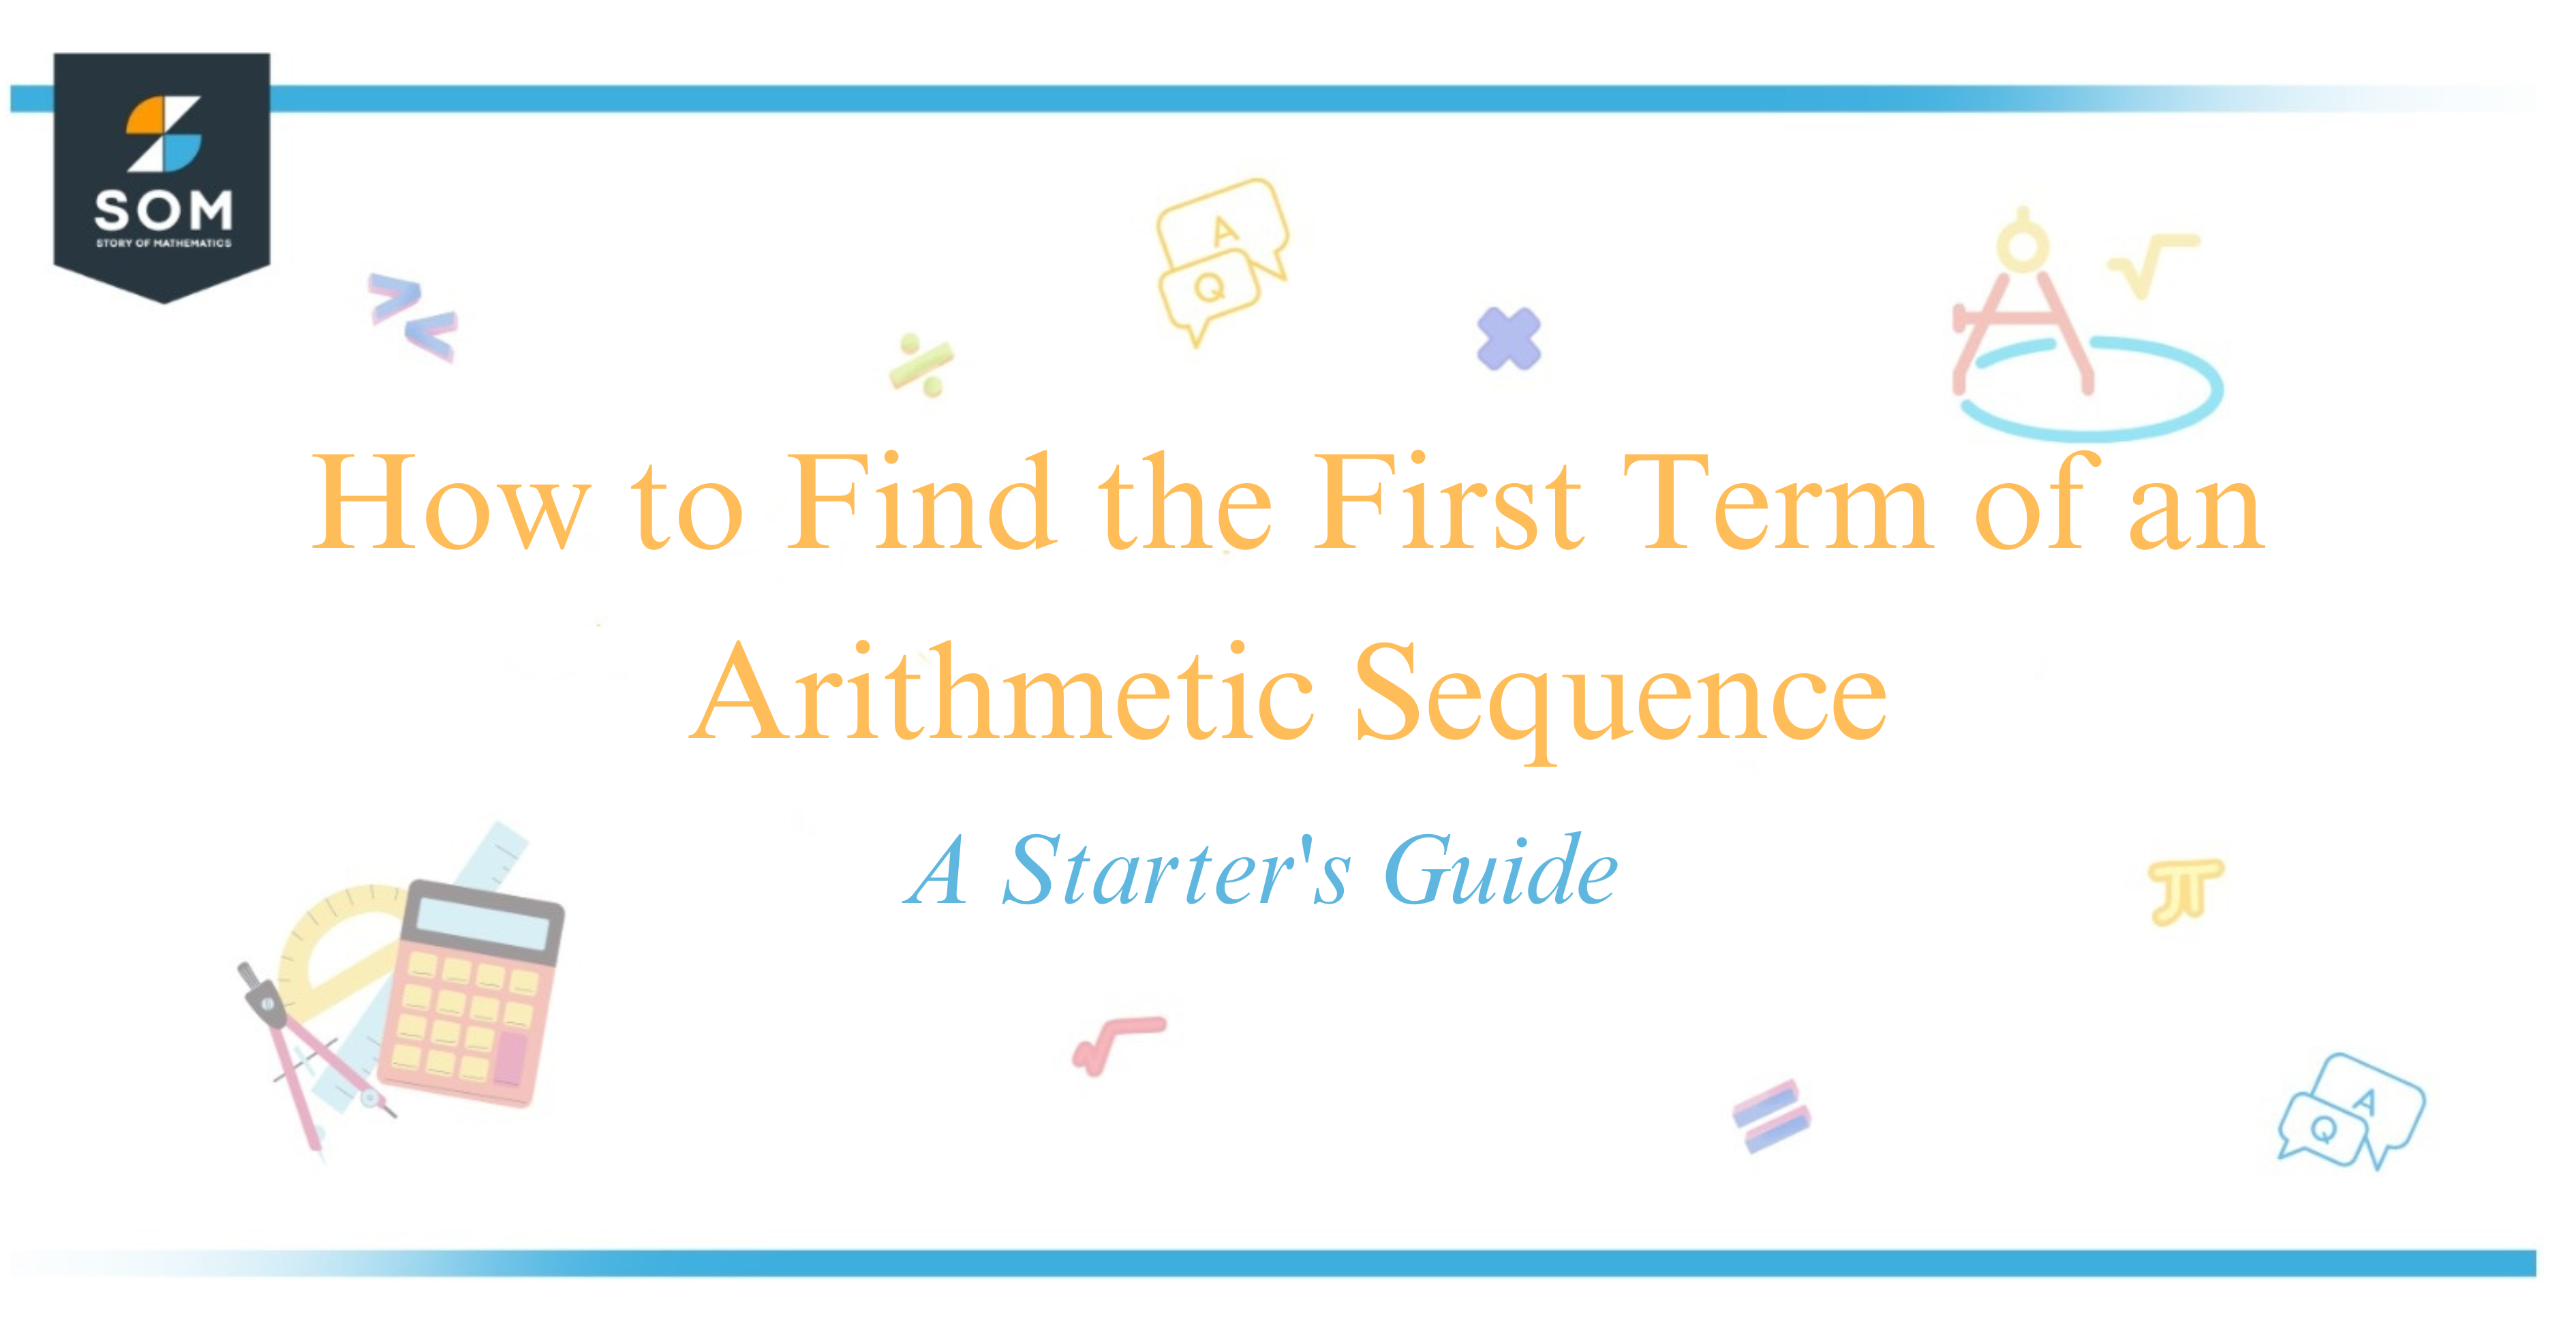 How to Find the First Term of an Arithmetic Sequence A Starter's Guide